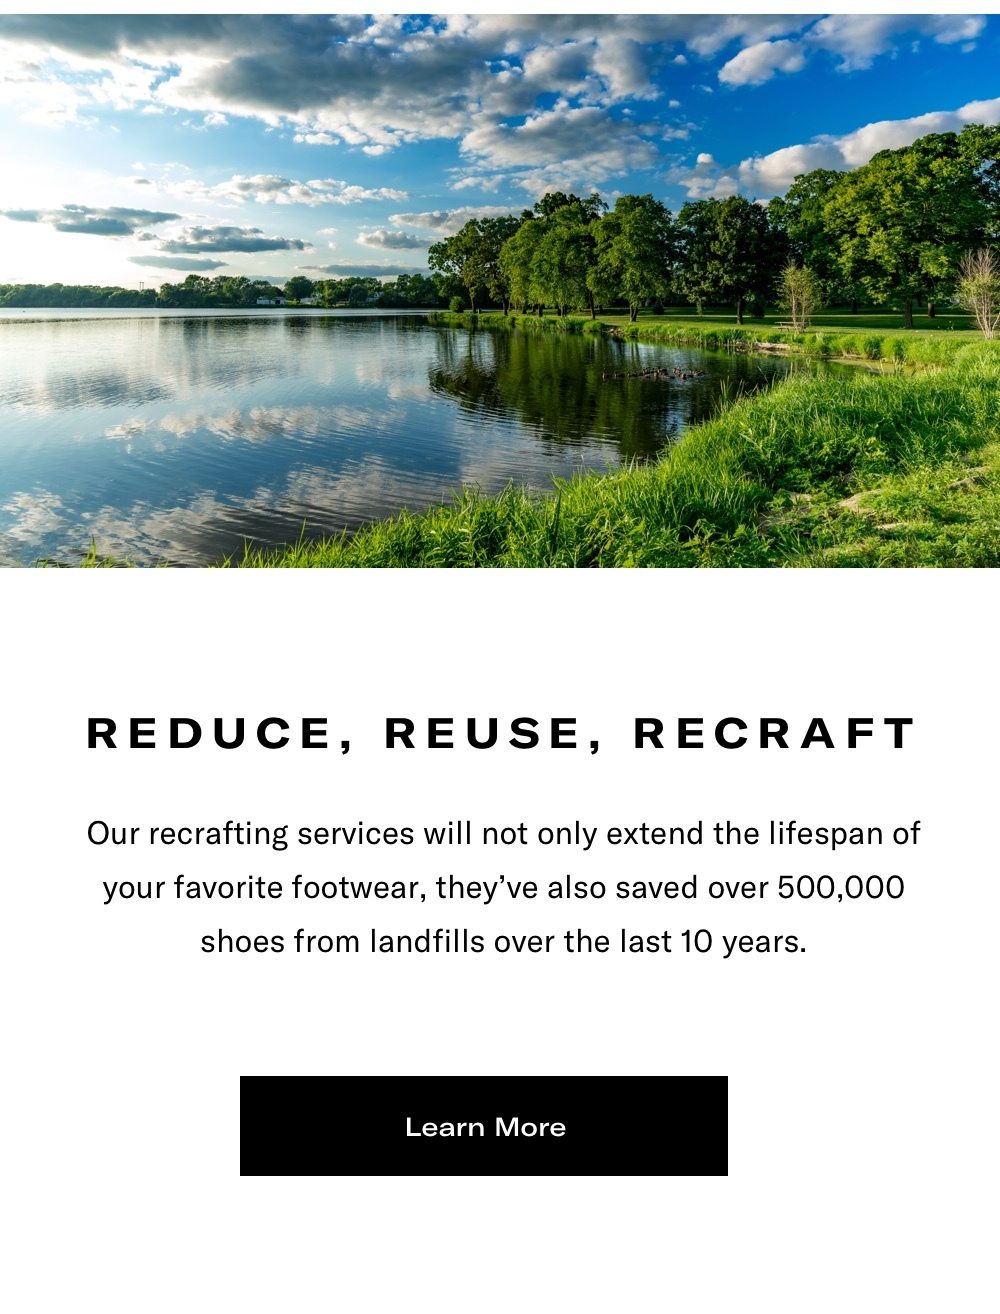 Reduce, Reuse, Recraft - Learn More About Recrafting